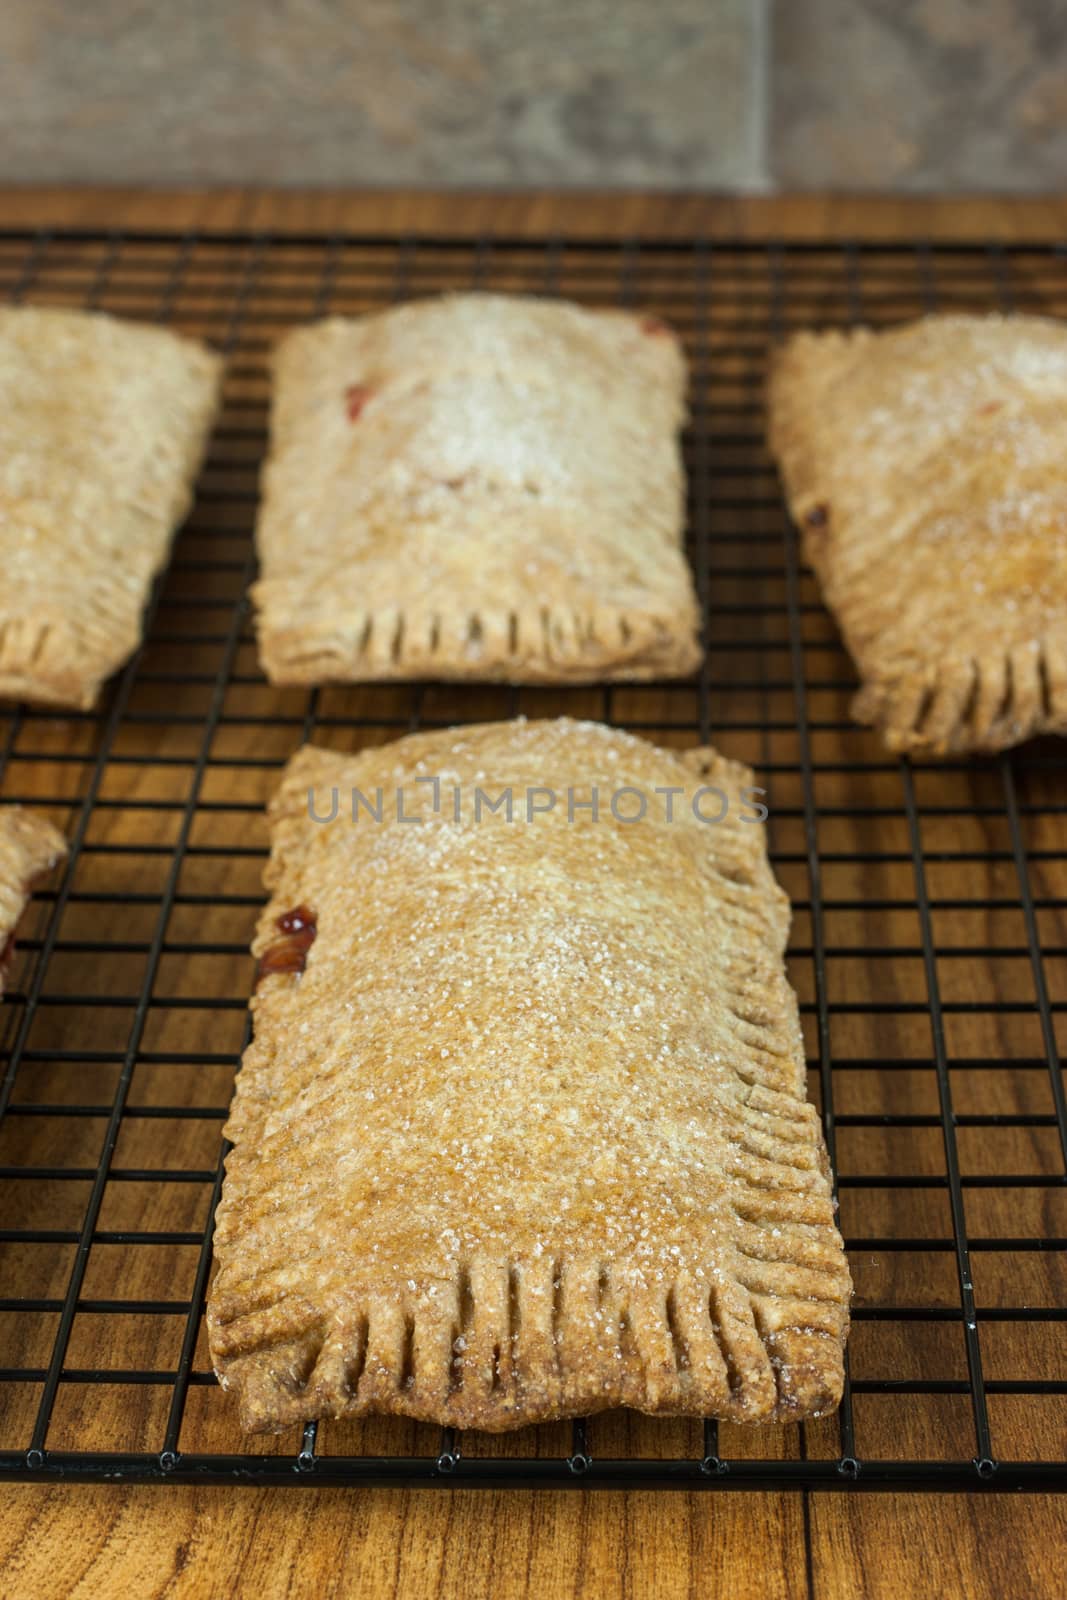 Whole wheat toaster pastries, lightly dusted with sugar crystals and filled with raspberry filling.